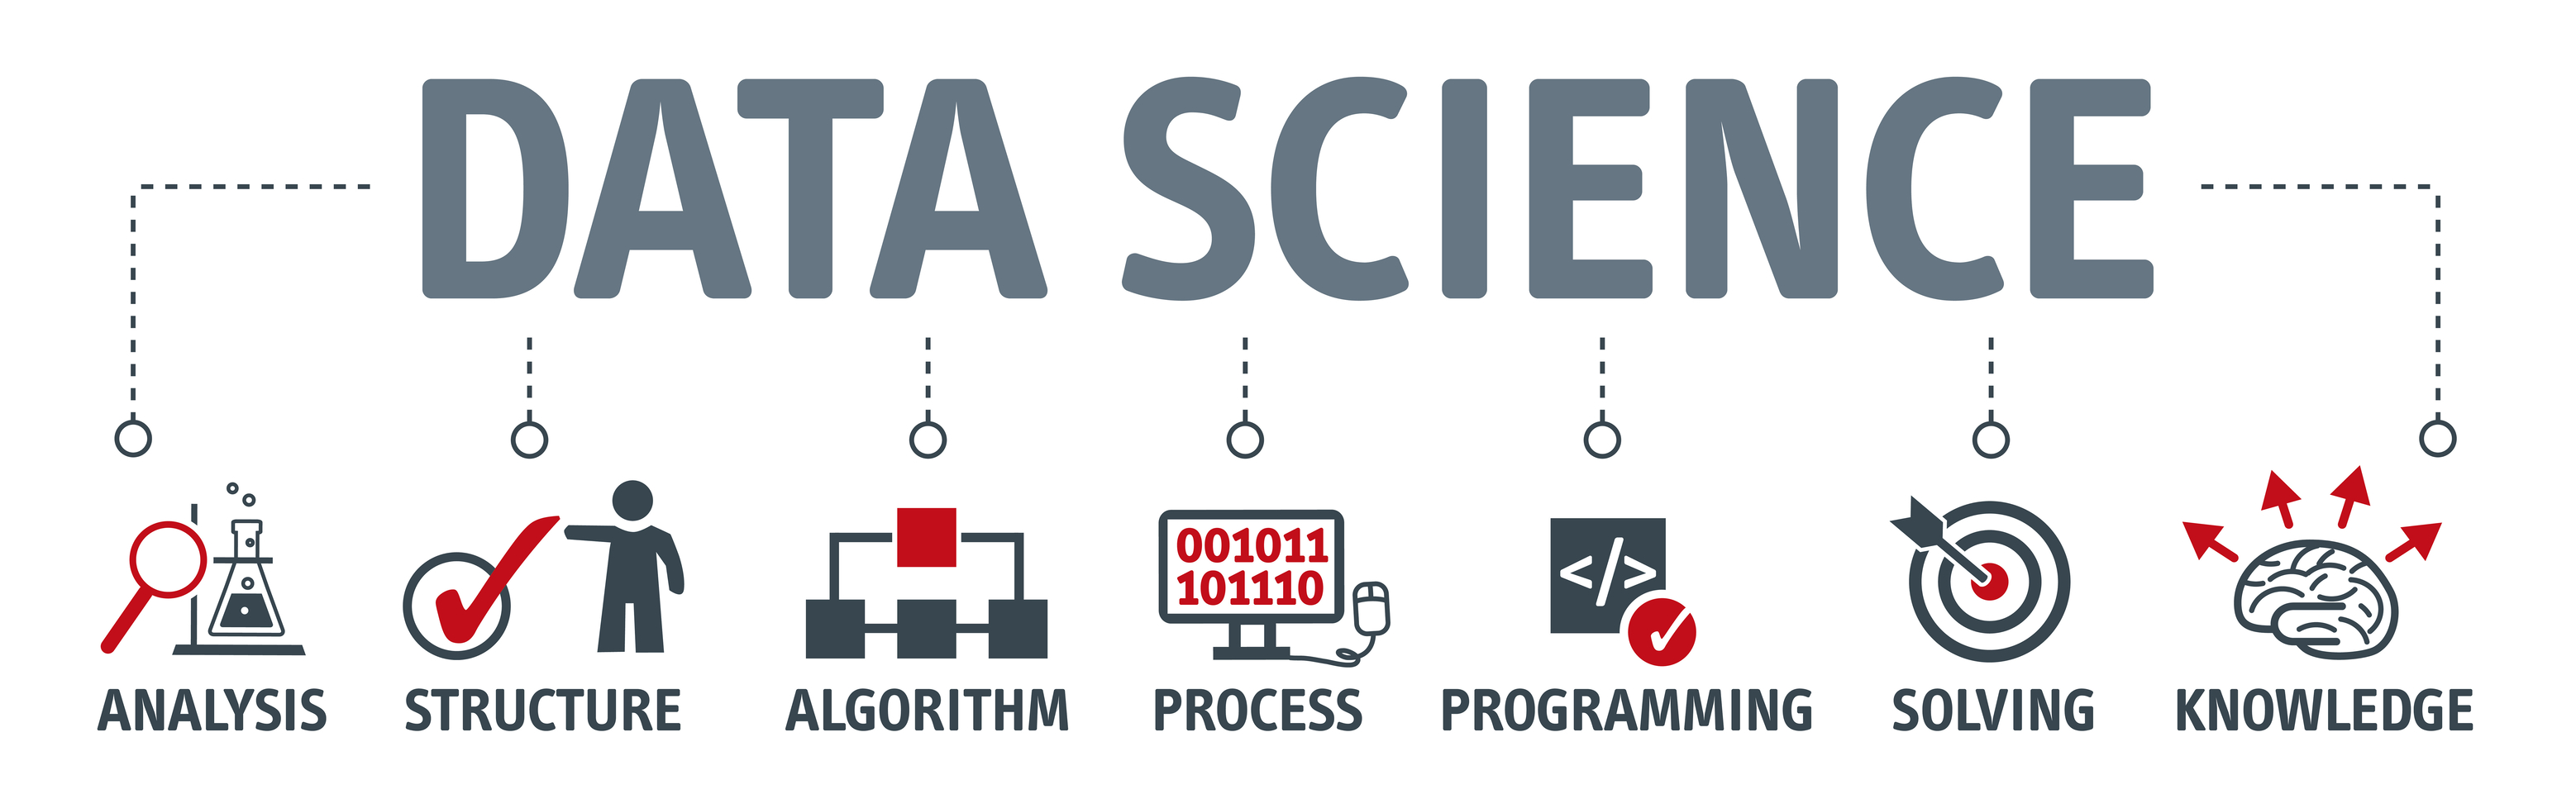 Data Science and How Data Scientists Add Value to Business - Big